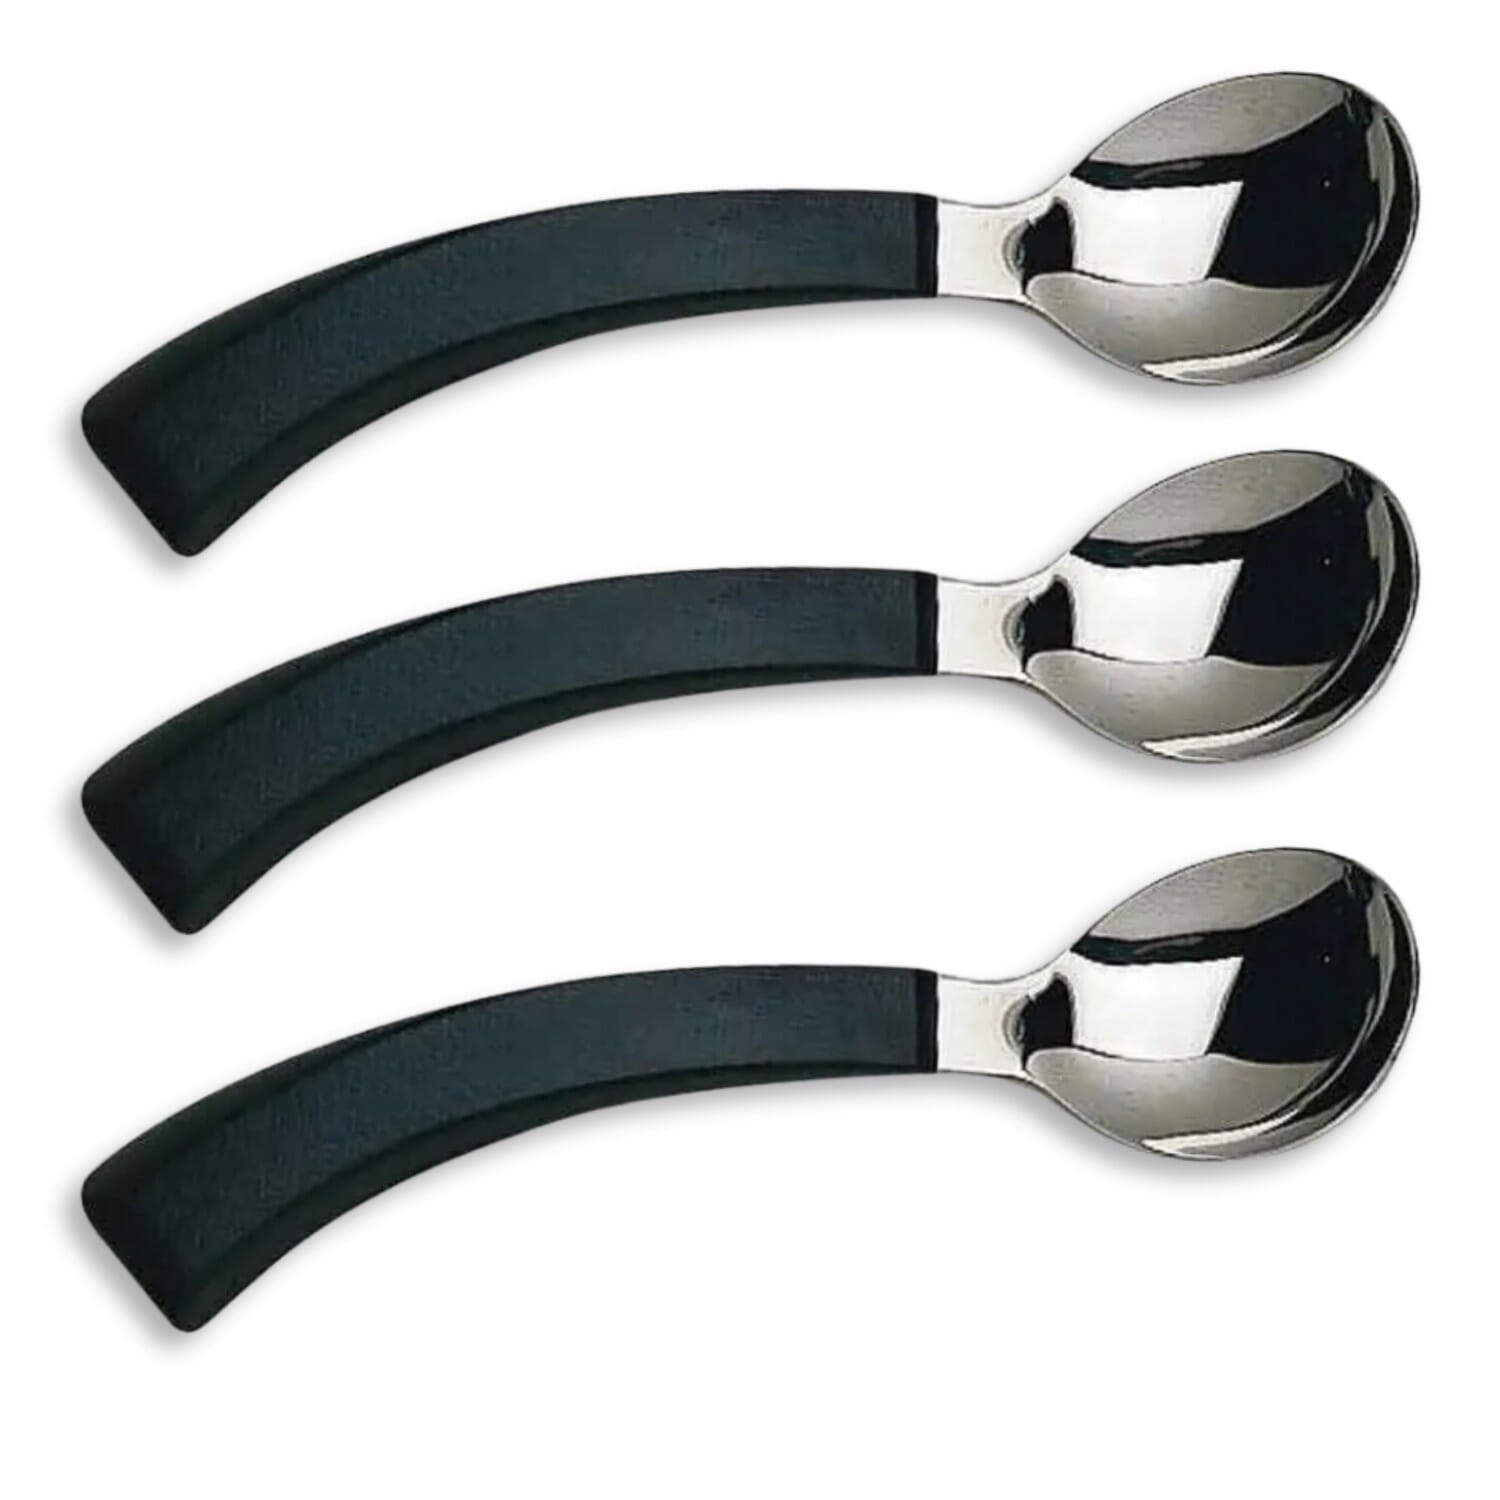 View Amefa Adapted Cutlery Left Hand Angled Spoon Pack of 3 information